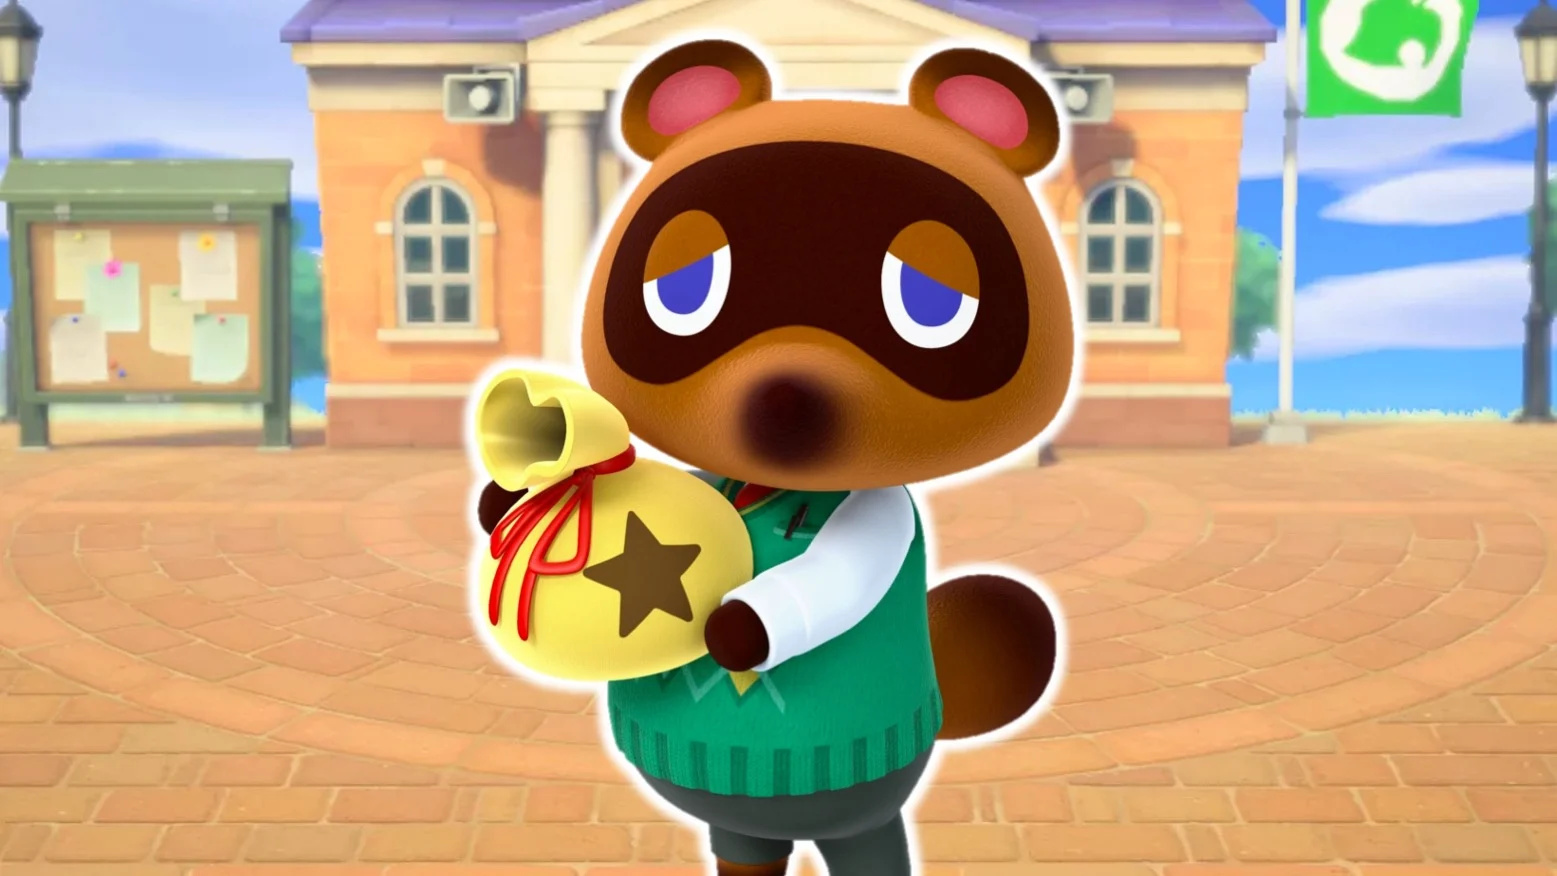 Bank Of Nook Reduces The Interest Rate In Animal Crossing New